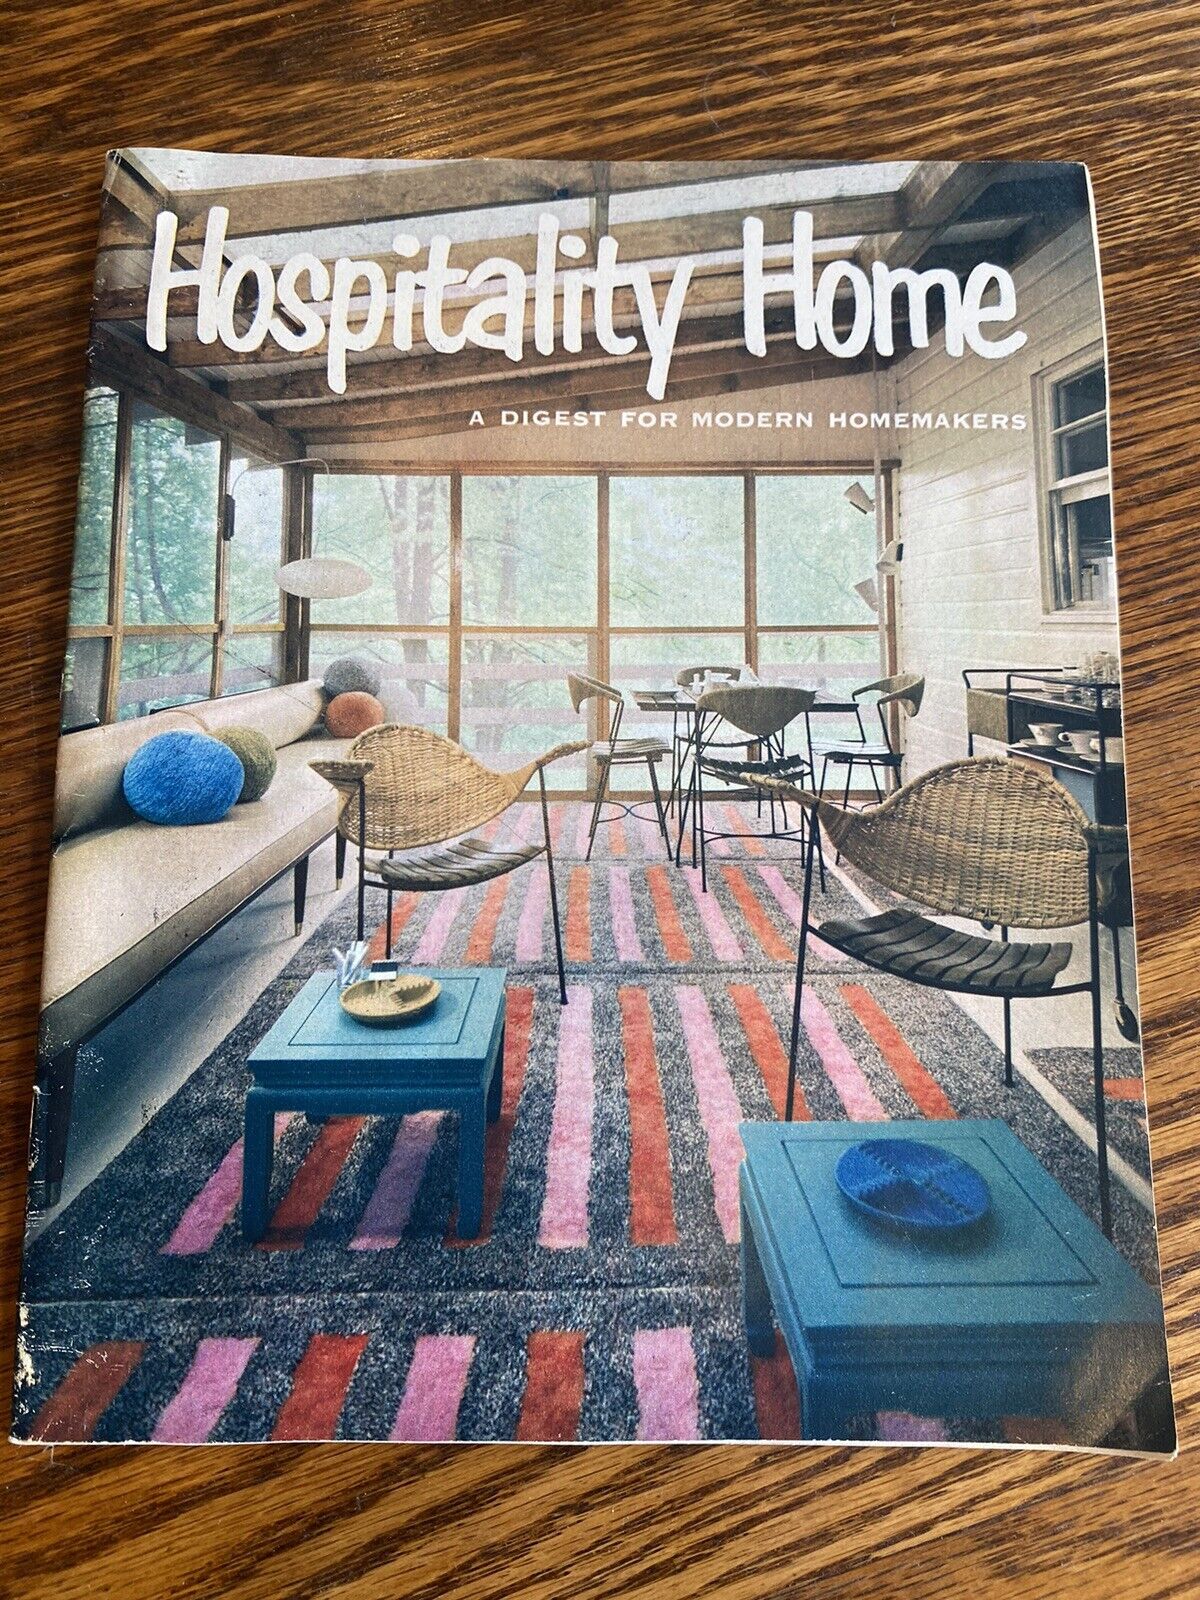 Hospitality Home Magazine; June 1958 “A Digest For Modern Homemakers”